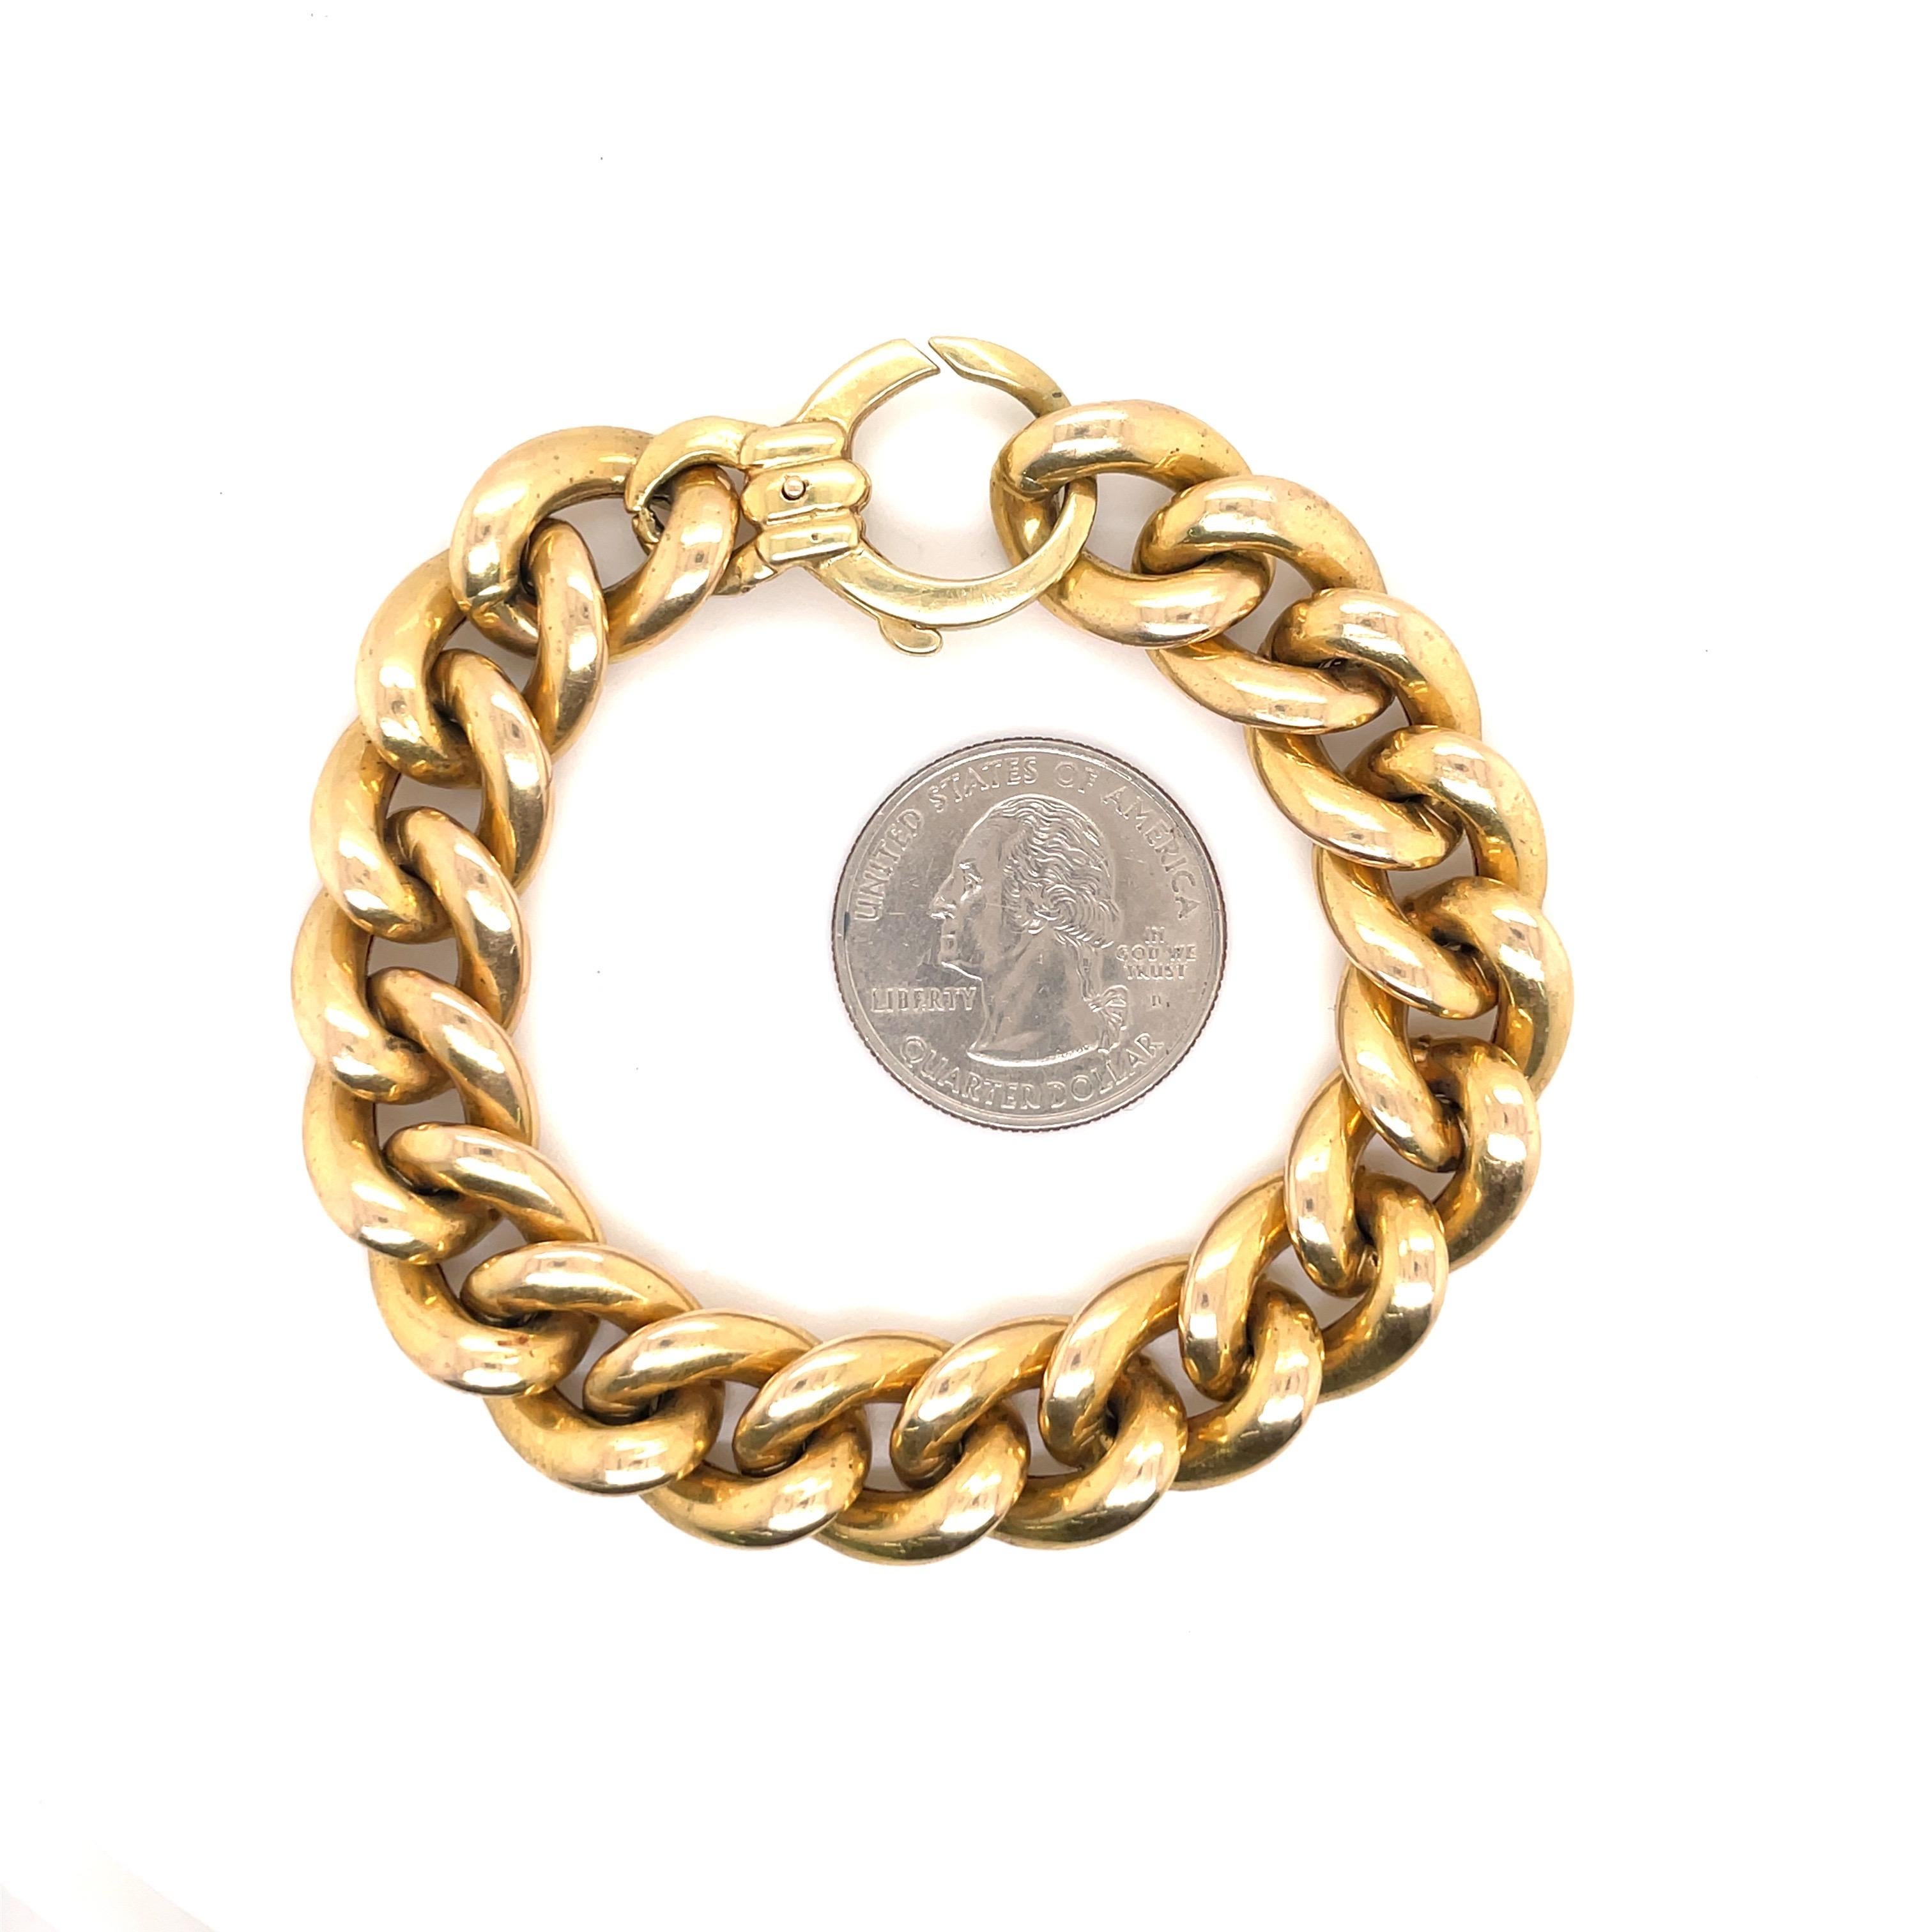 14 Karat yellow gold bracelet featuring 18 high polish links weighing 23.4 grams, 8 inches long.
Matching necklace is also available and can be extended onto the necklace to make long. 
Necklace is 17.5 inches
Price for bracelet only. 